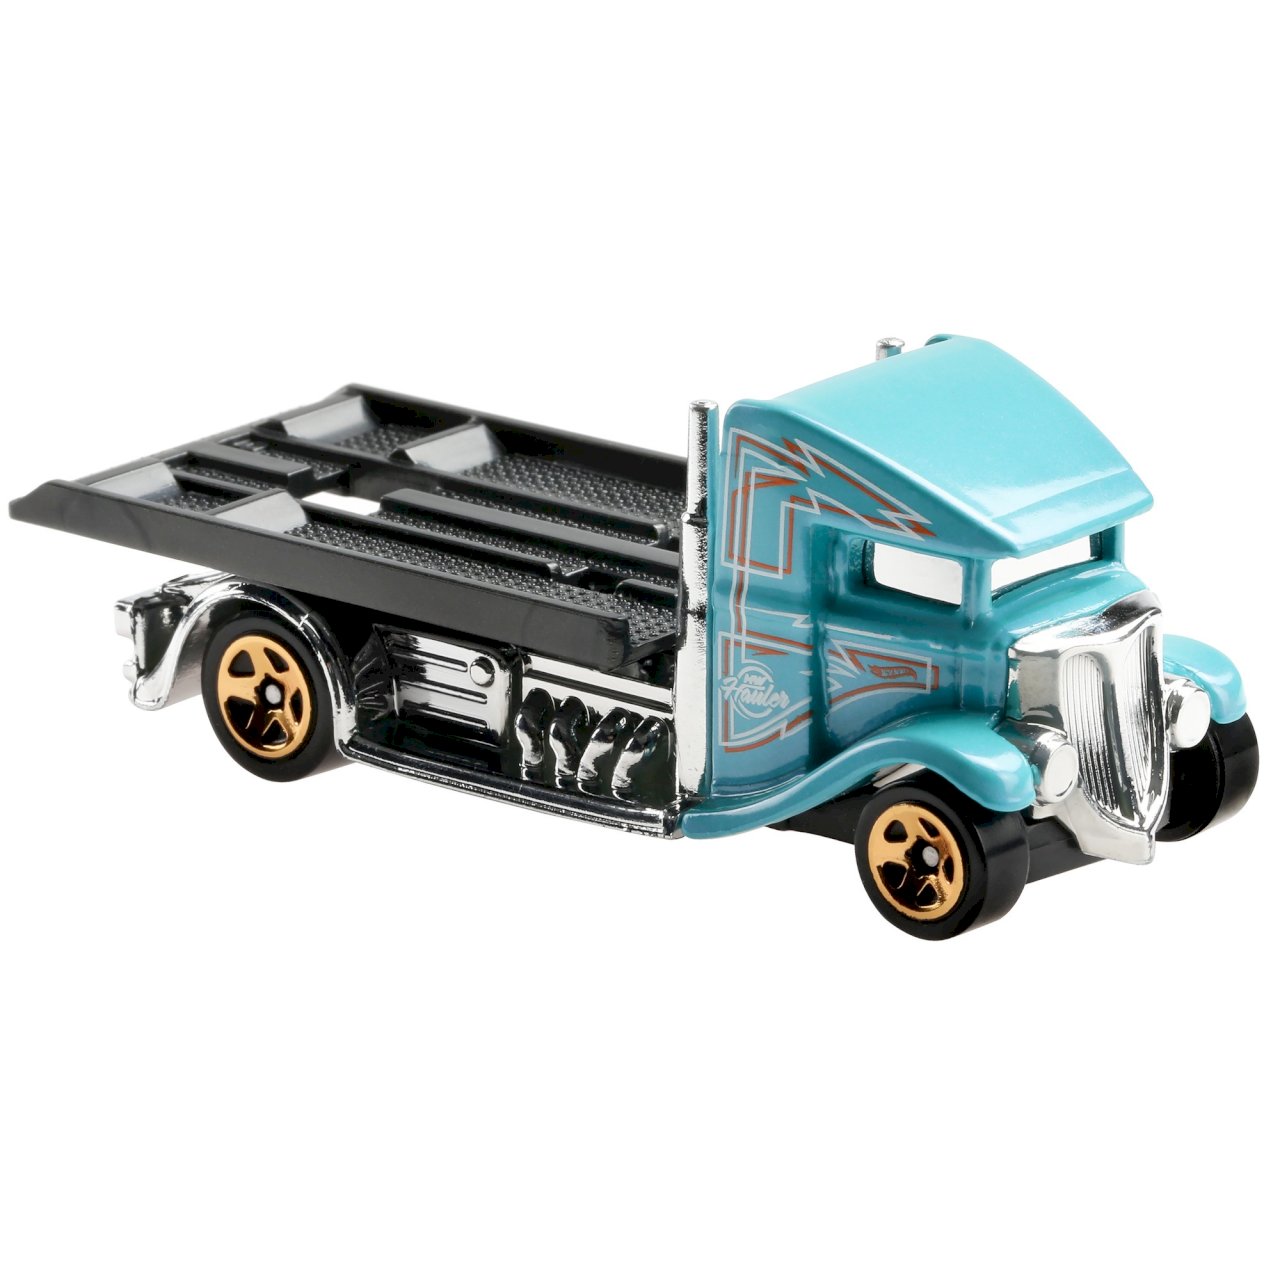 Fast bed. Машинка hot Wheels fast Bed Hauler. Hot Wheels fast-Bed Hauler синяя кабина. Hot Wheels fast-Bed Hauler tele, Taos Turquoise. Fast-Bed Hauler Custom.